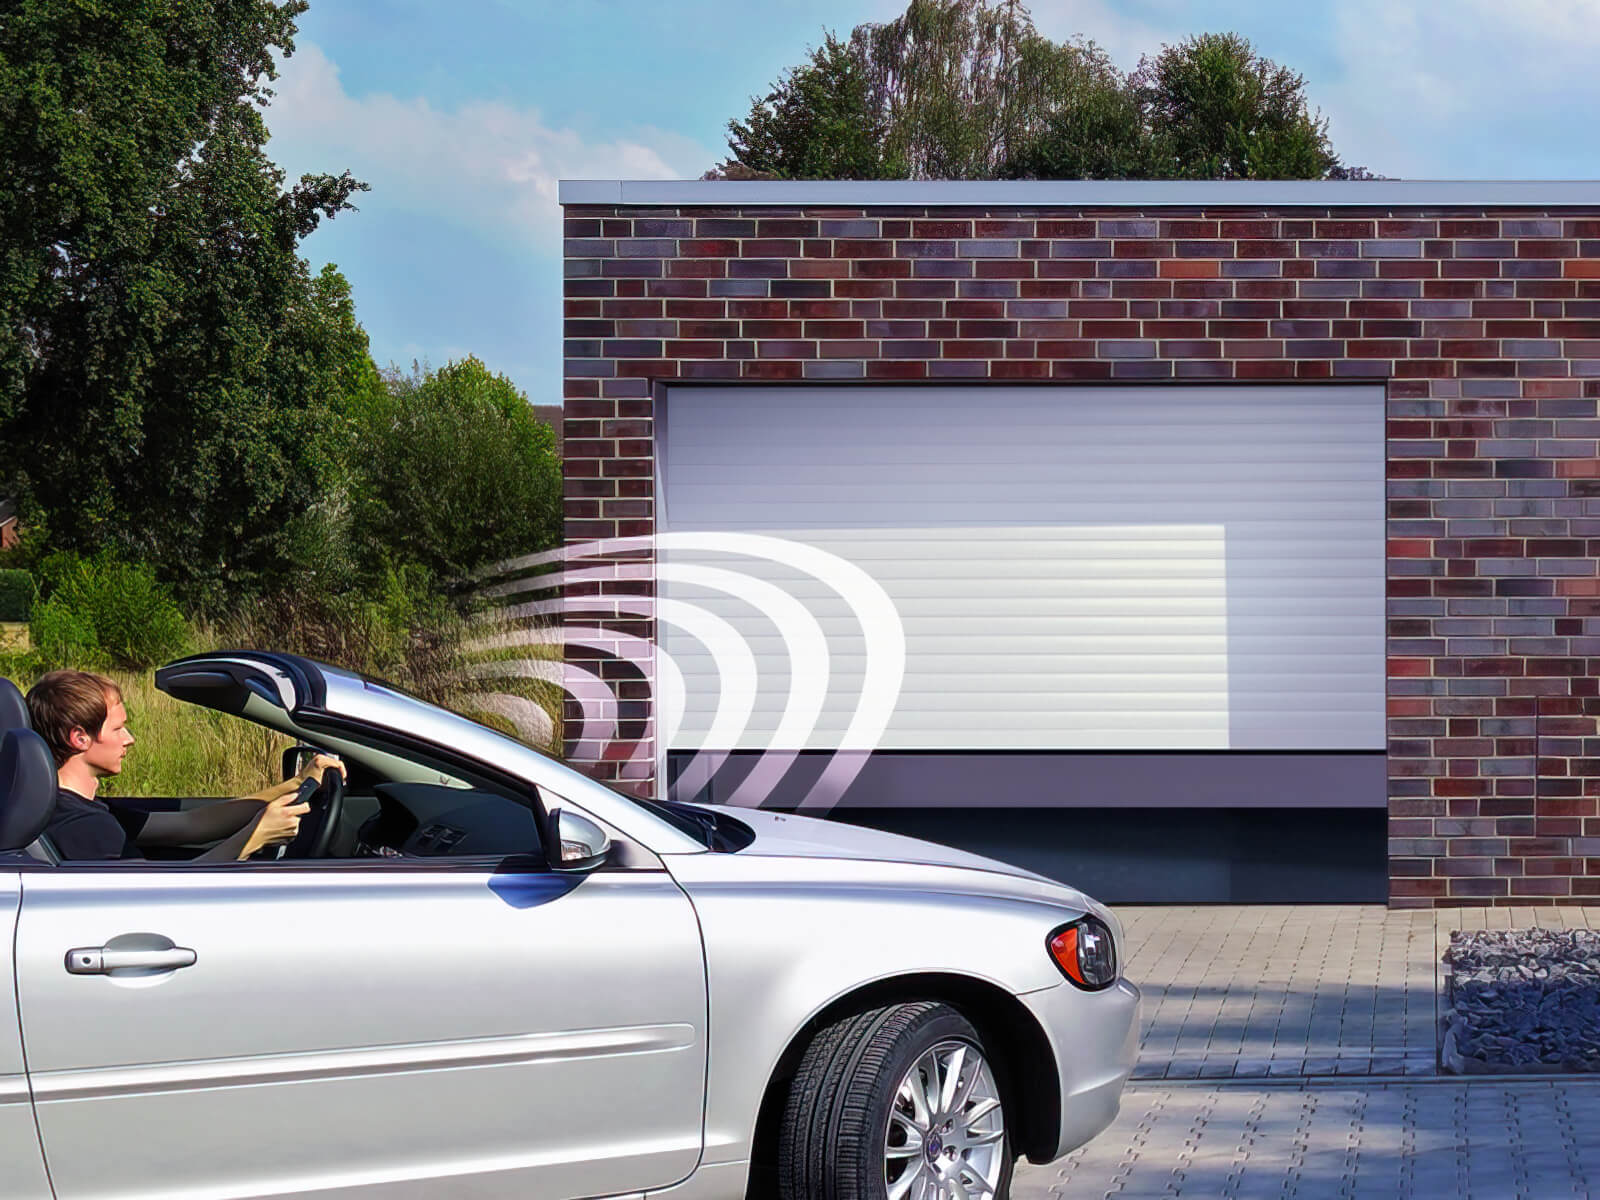 Professional Exeter Electric Garage Door Automation company